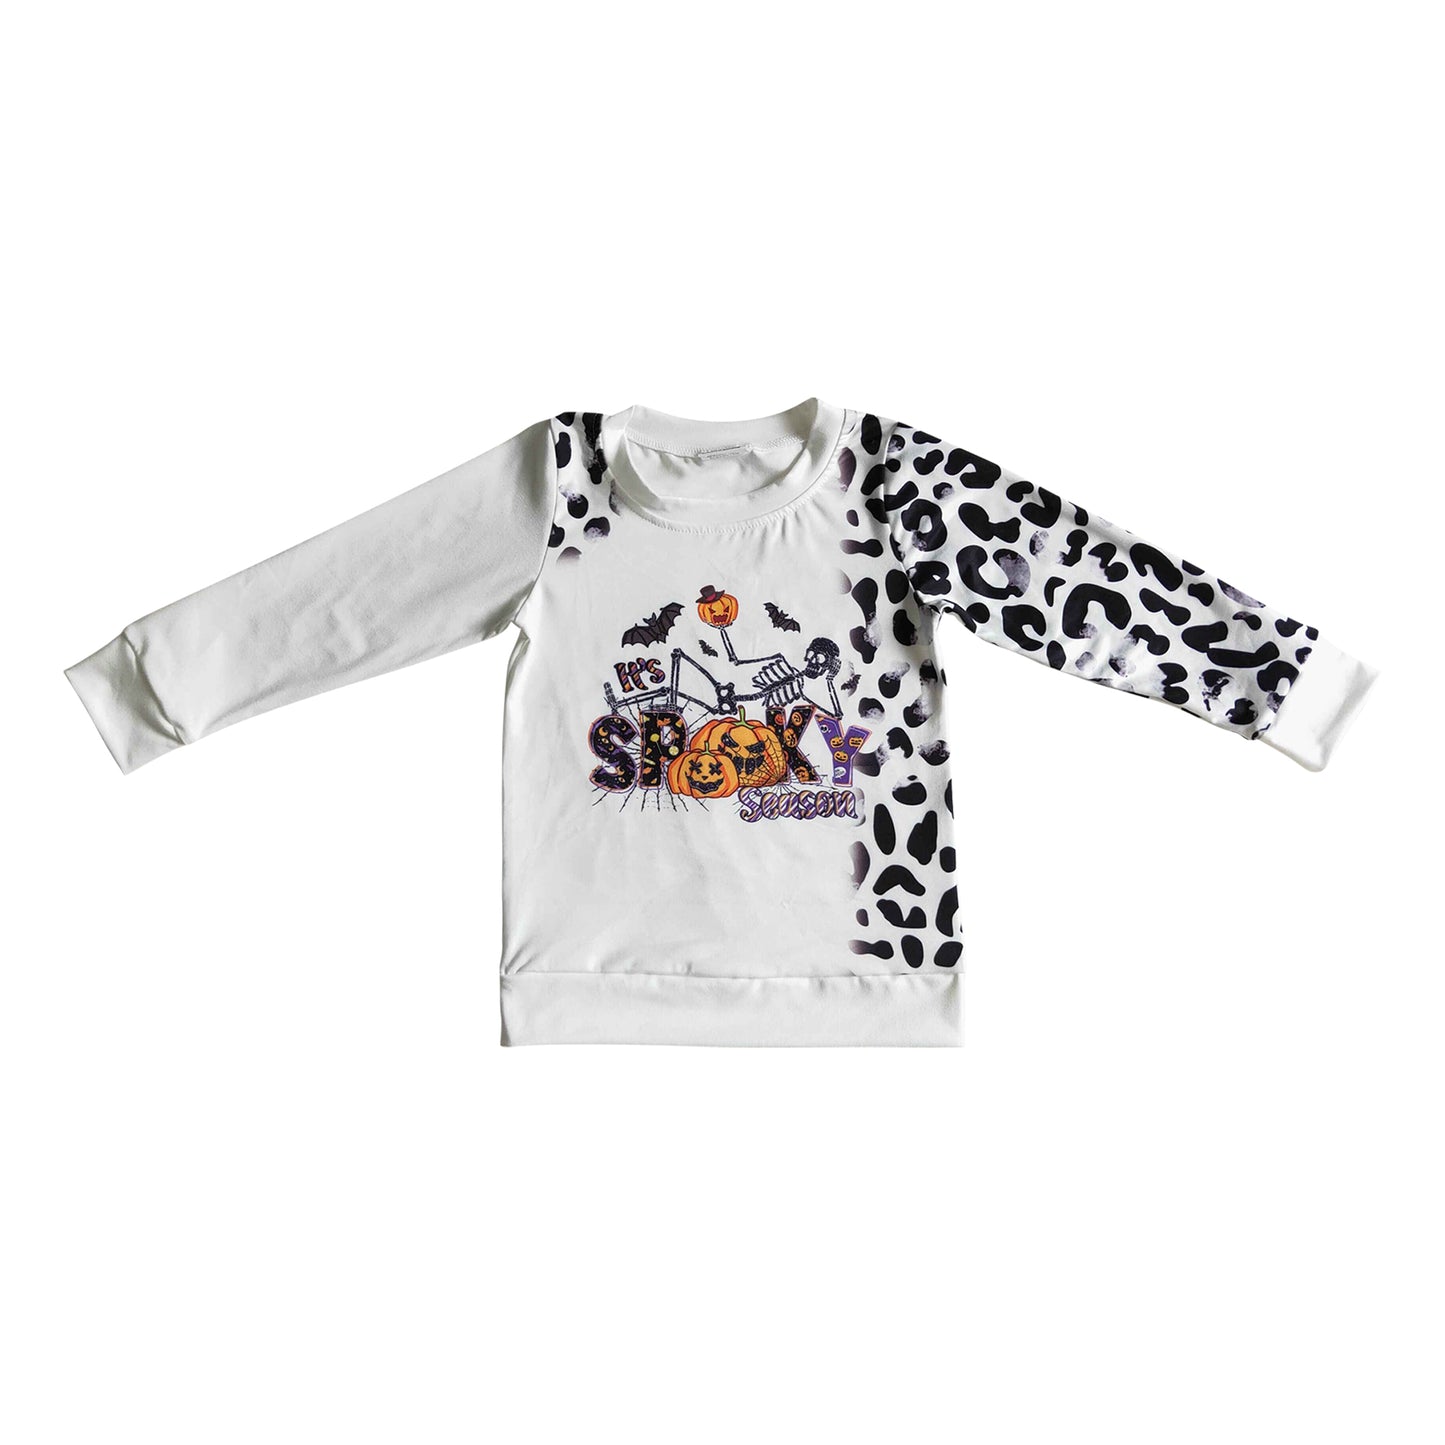 spooky white shirt with leopard for kids